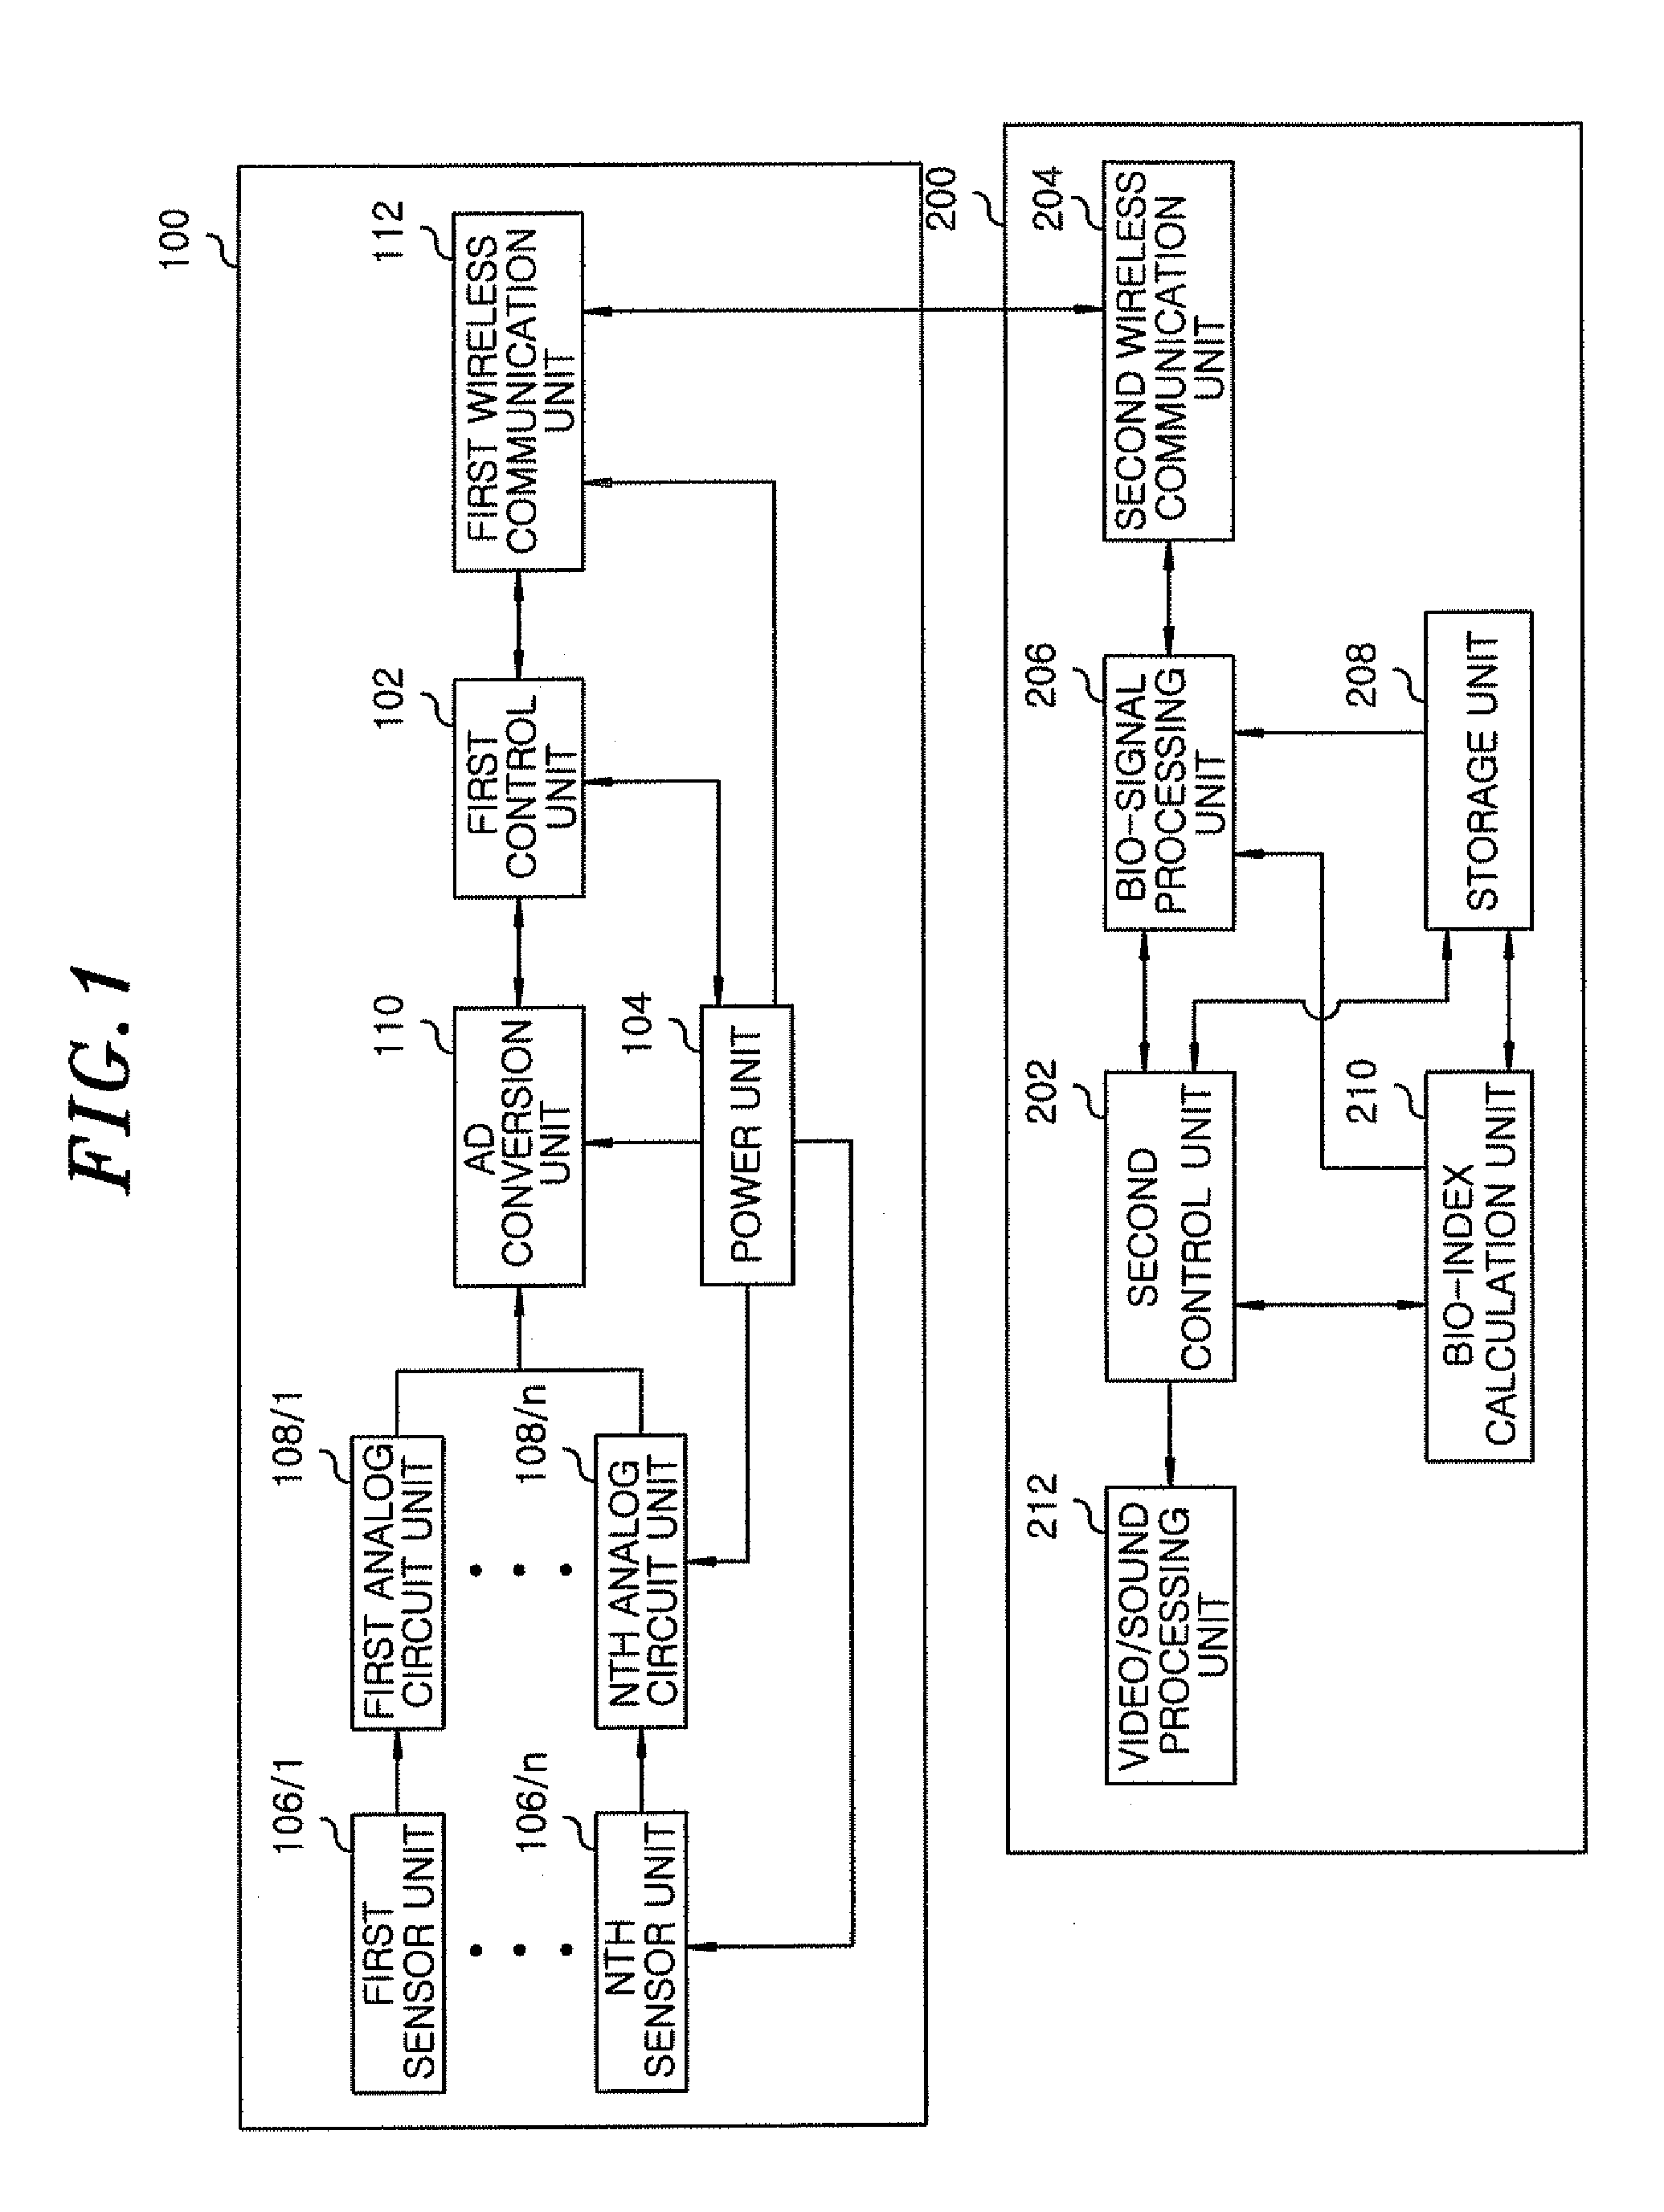 System for measuring bio-signals and method of providing health care service using the same